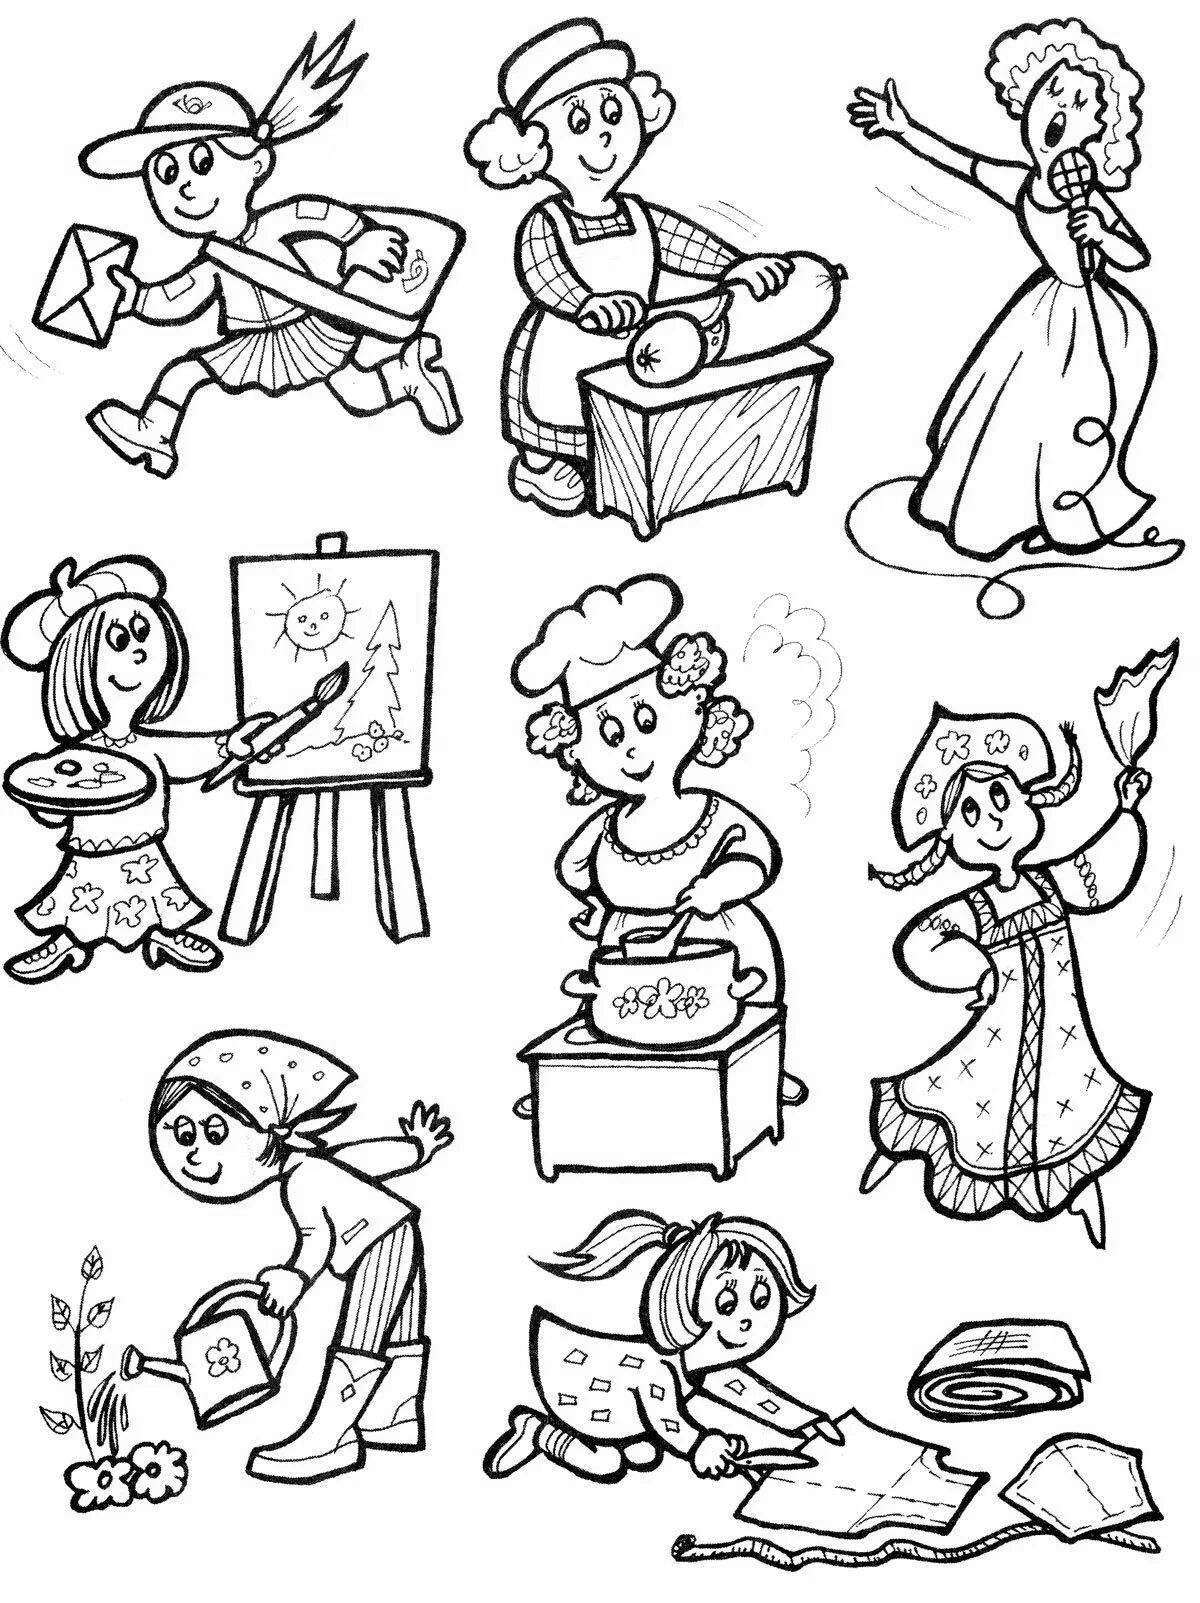 Tempting 1st grade job coloring pages